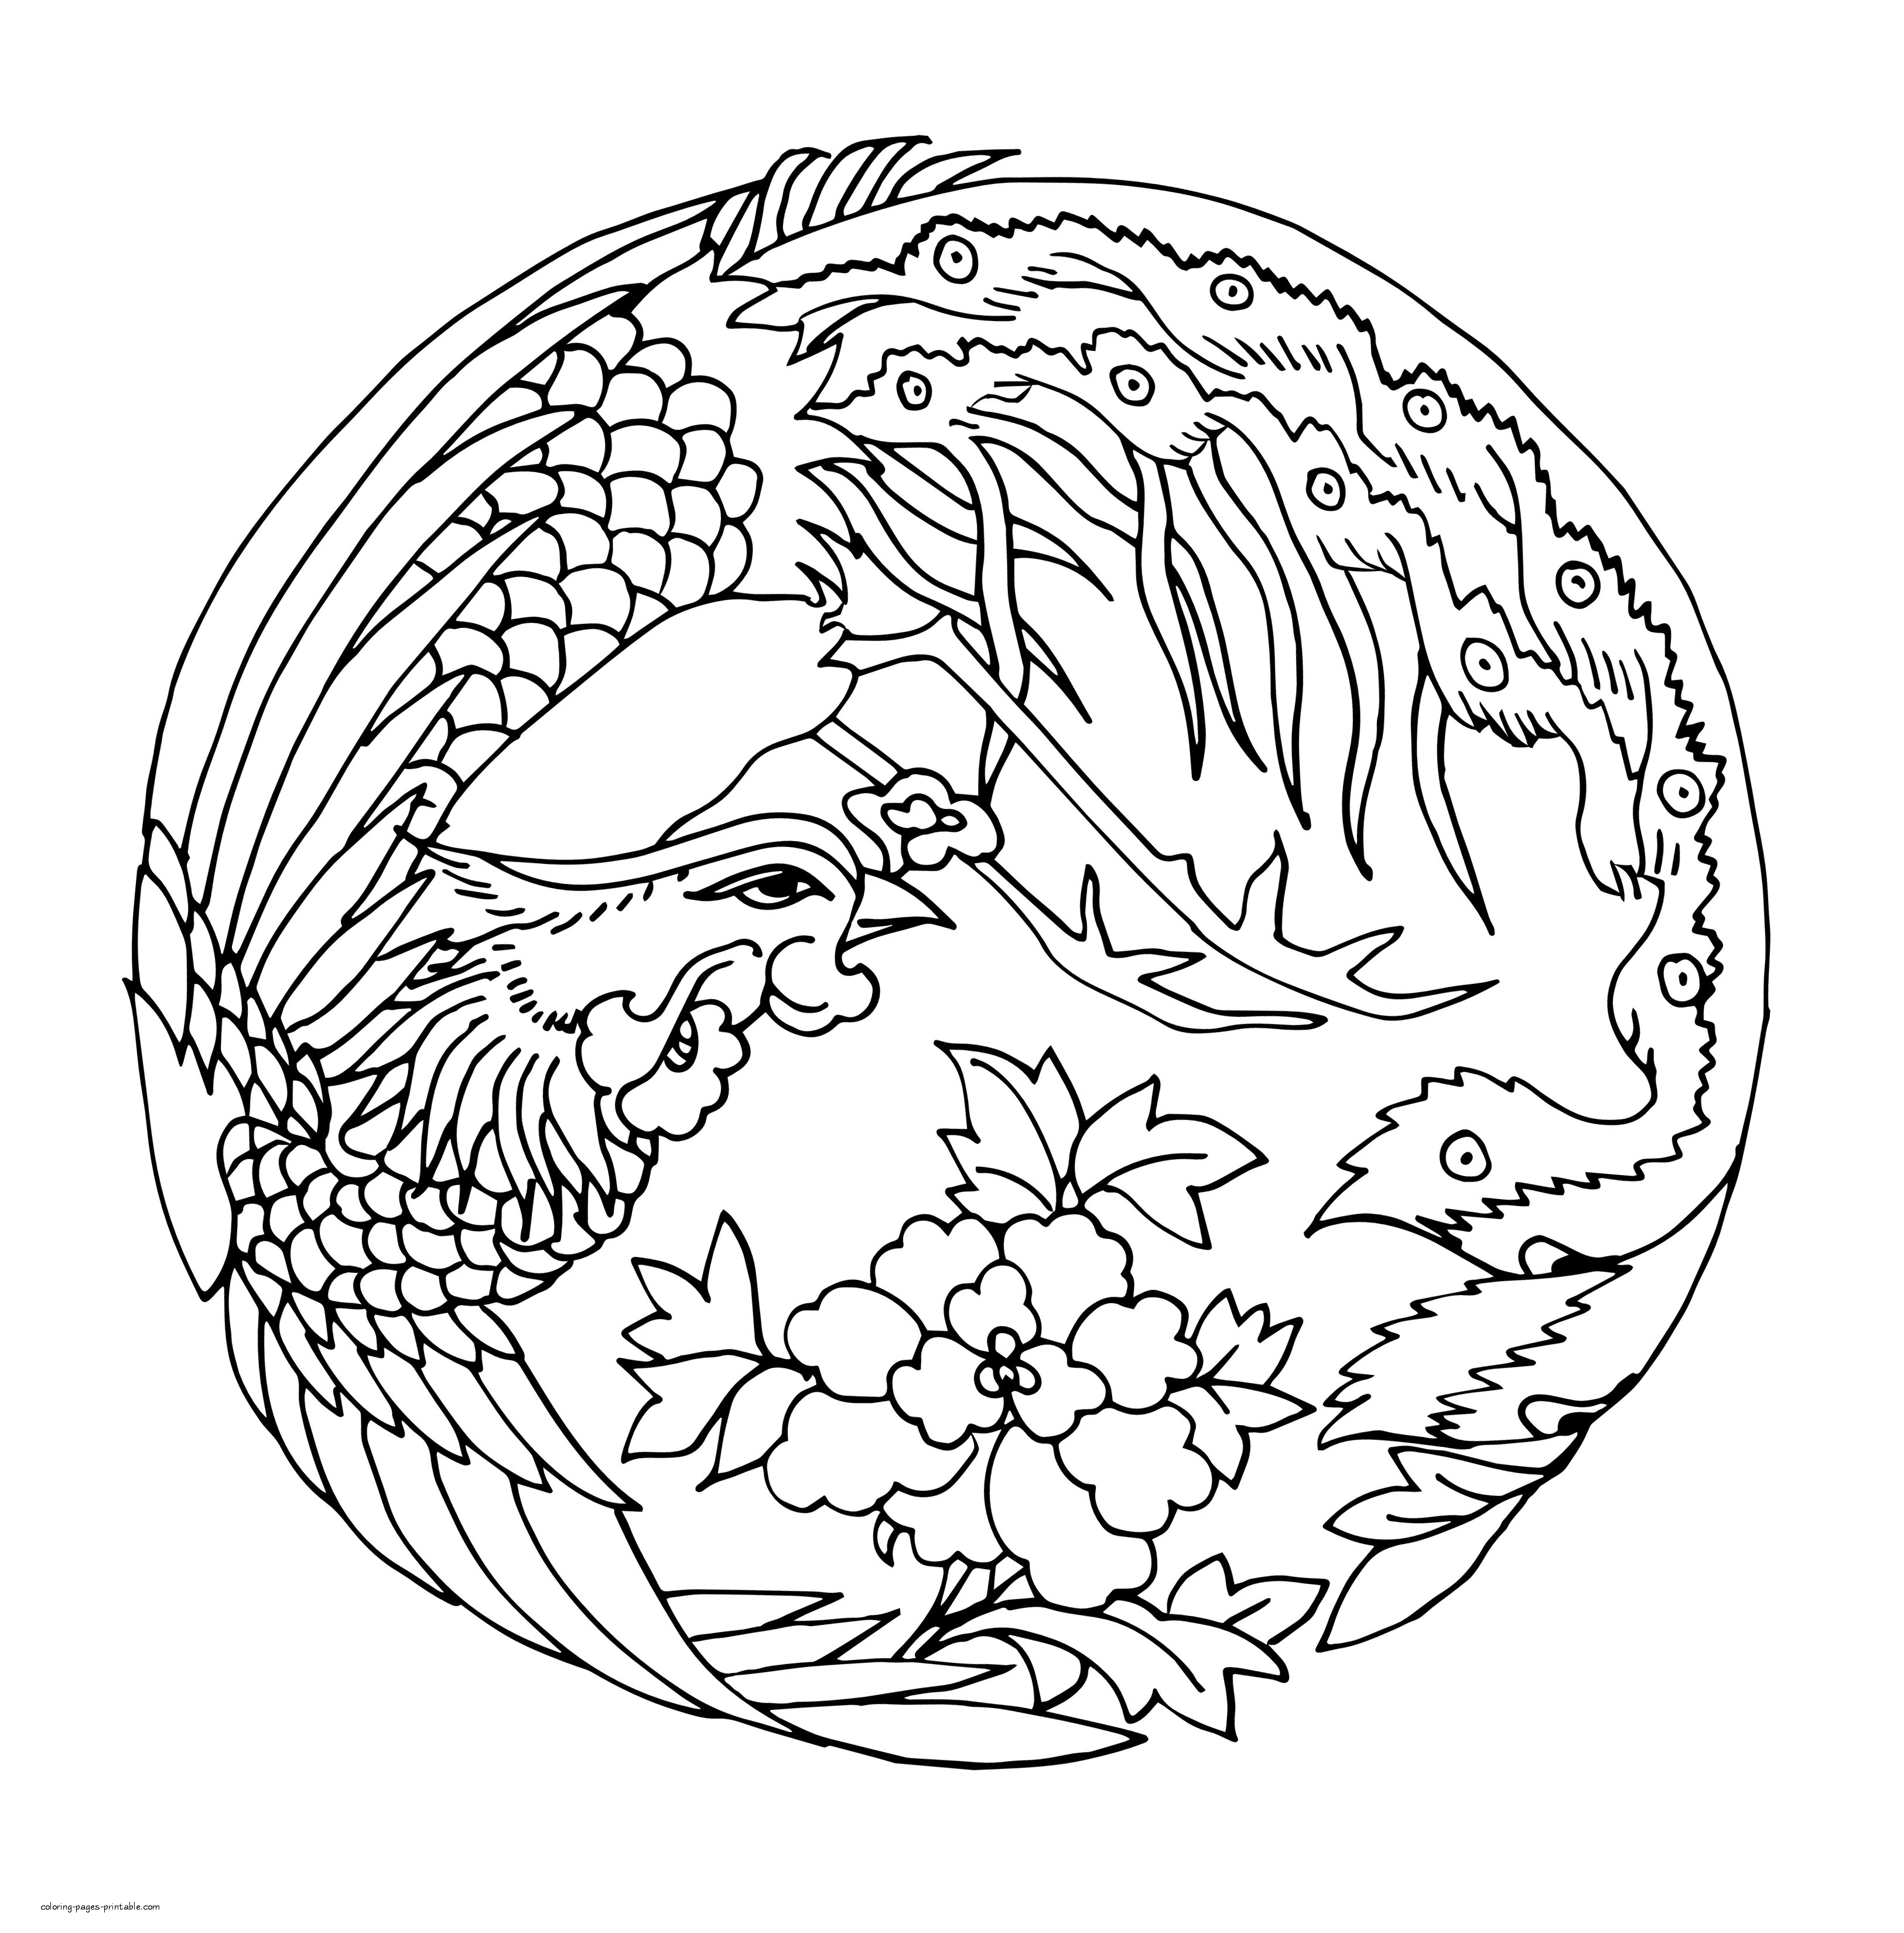 coloring-pages-for-adults-firebird-coloring-pages-printable-com